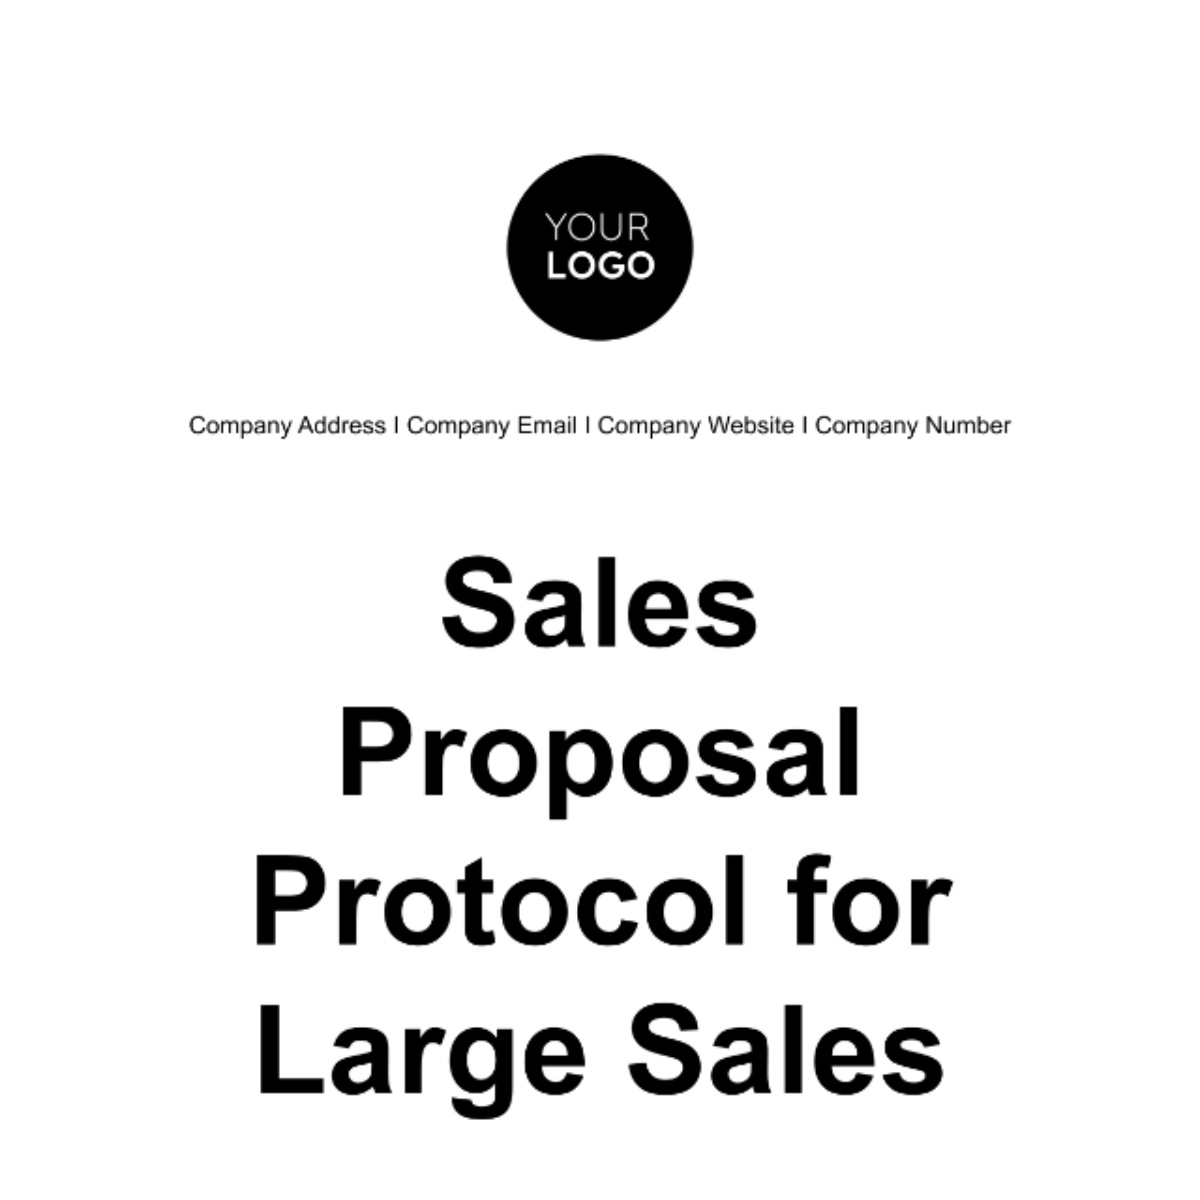 Sales Proposal Protocol for Large Sales Template